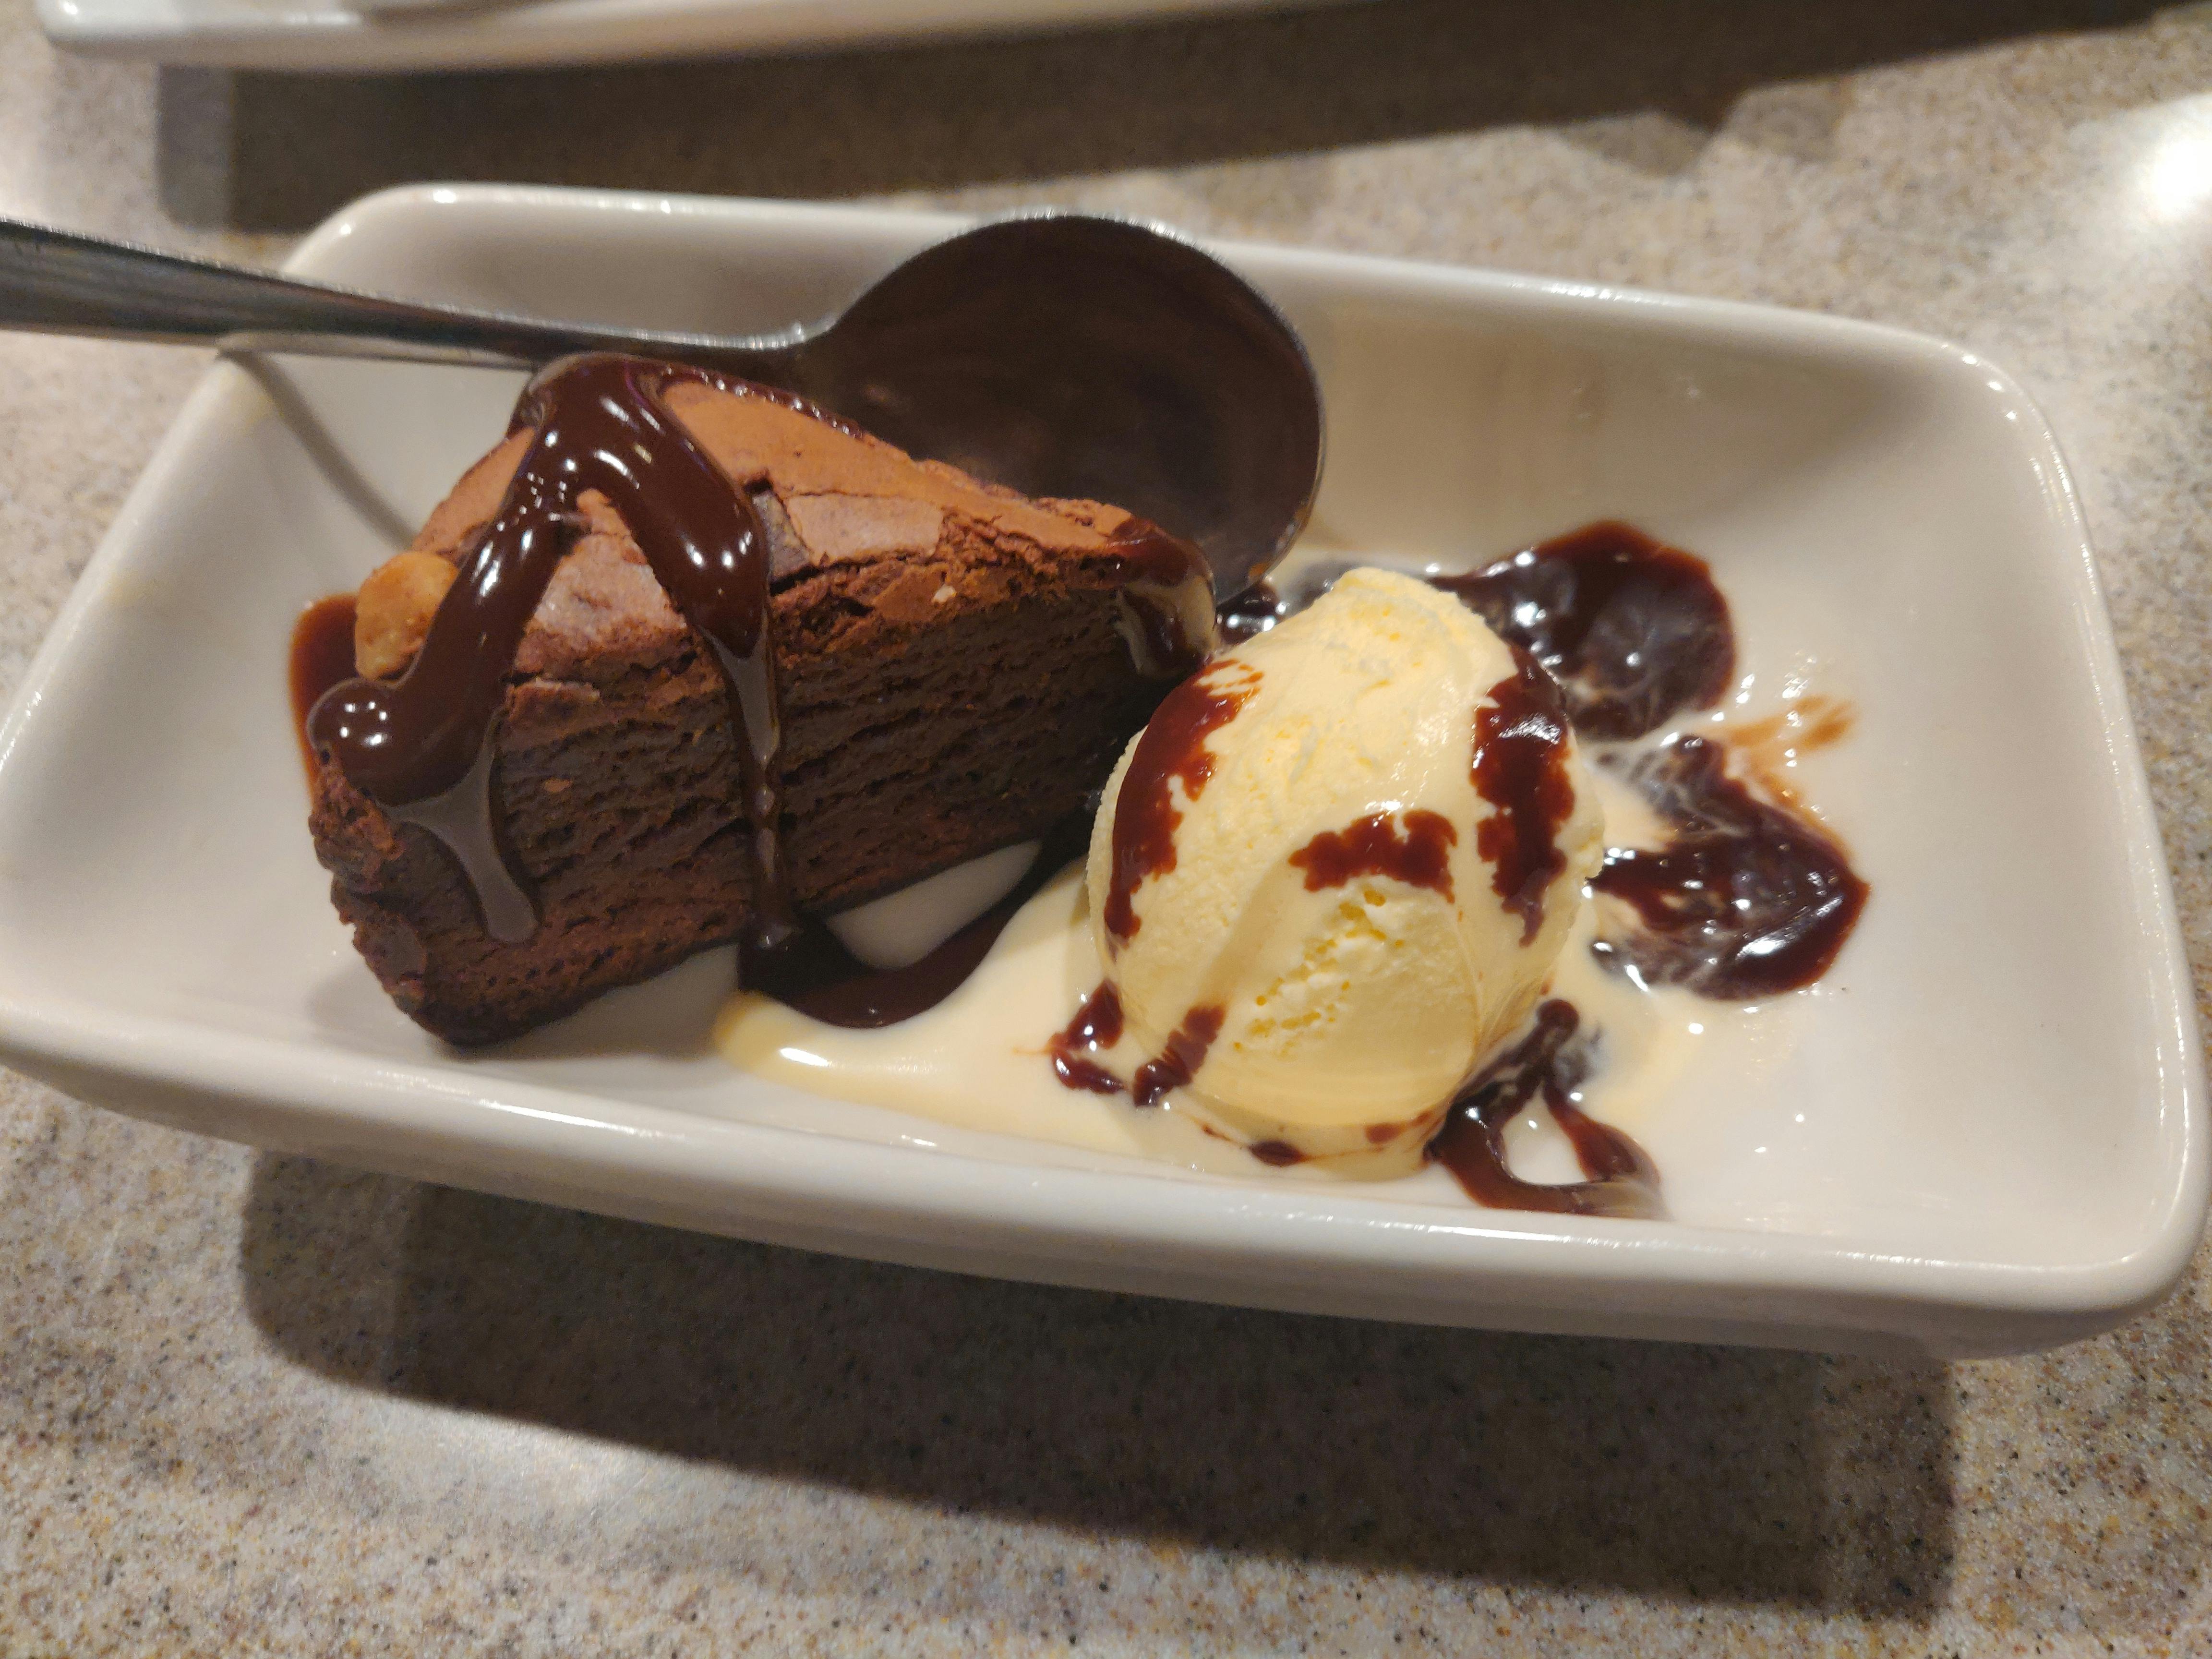 An Applebee's brownie dessert with ice cream and chocolate sauce on a plate with a spoon.